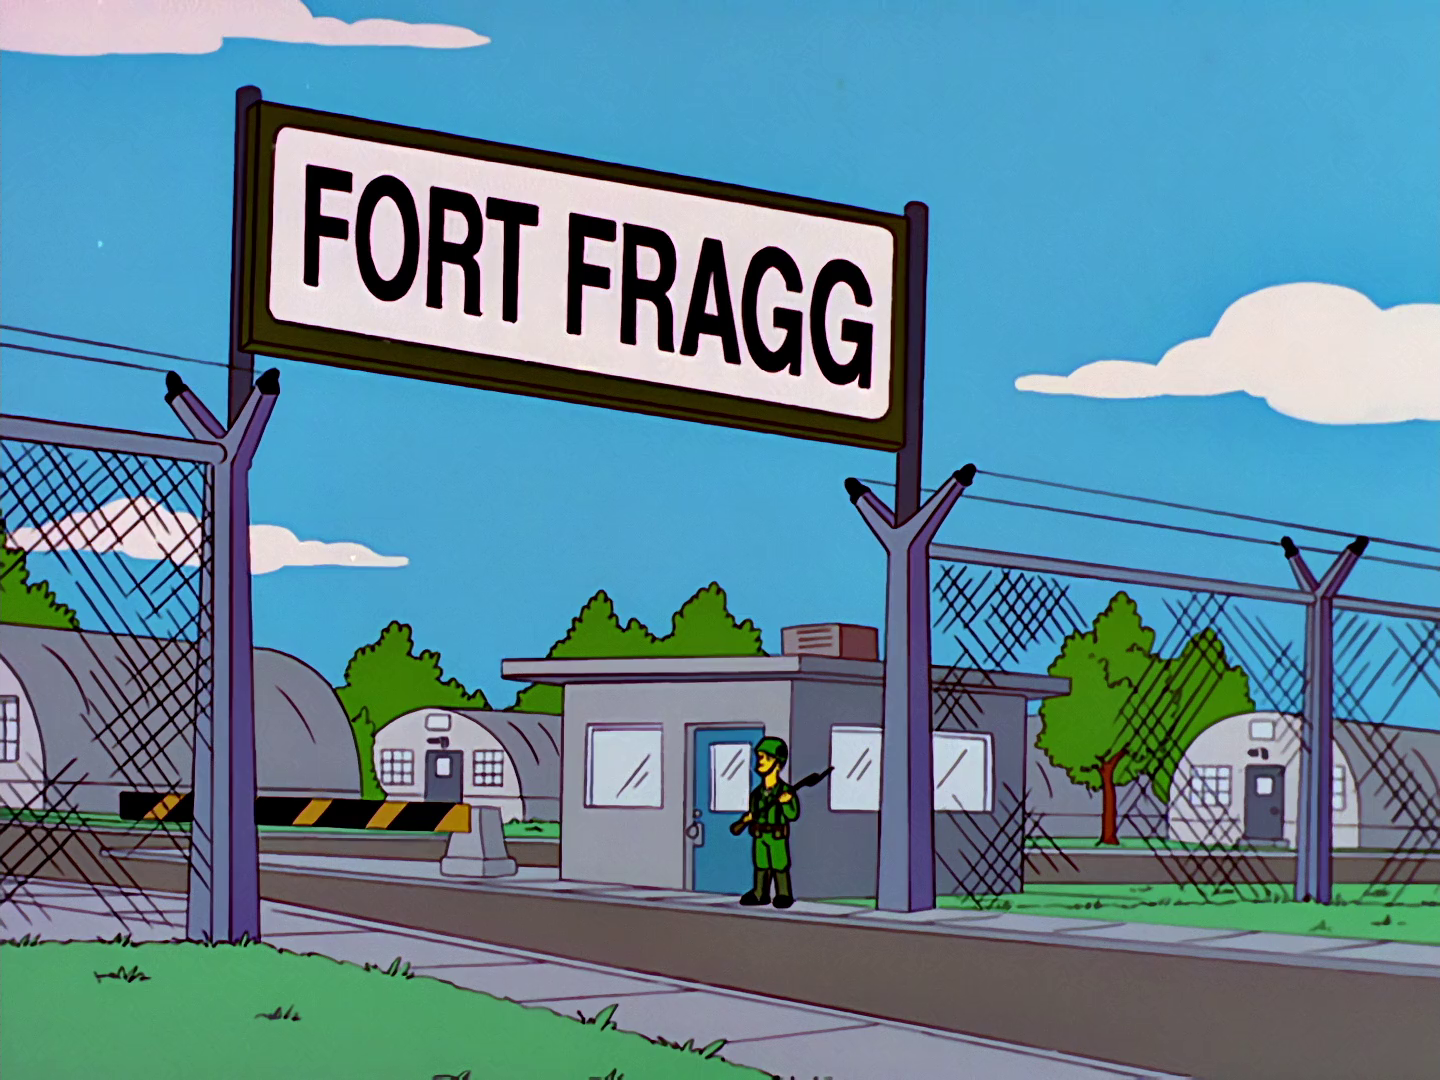 http://static4.wikia.nocookie.net/__cb20100904150340/simpsons/images/8/8f/Fort-fragg.png